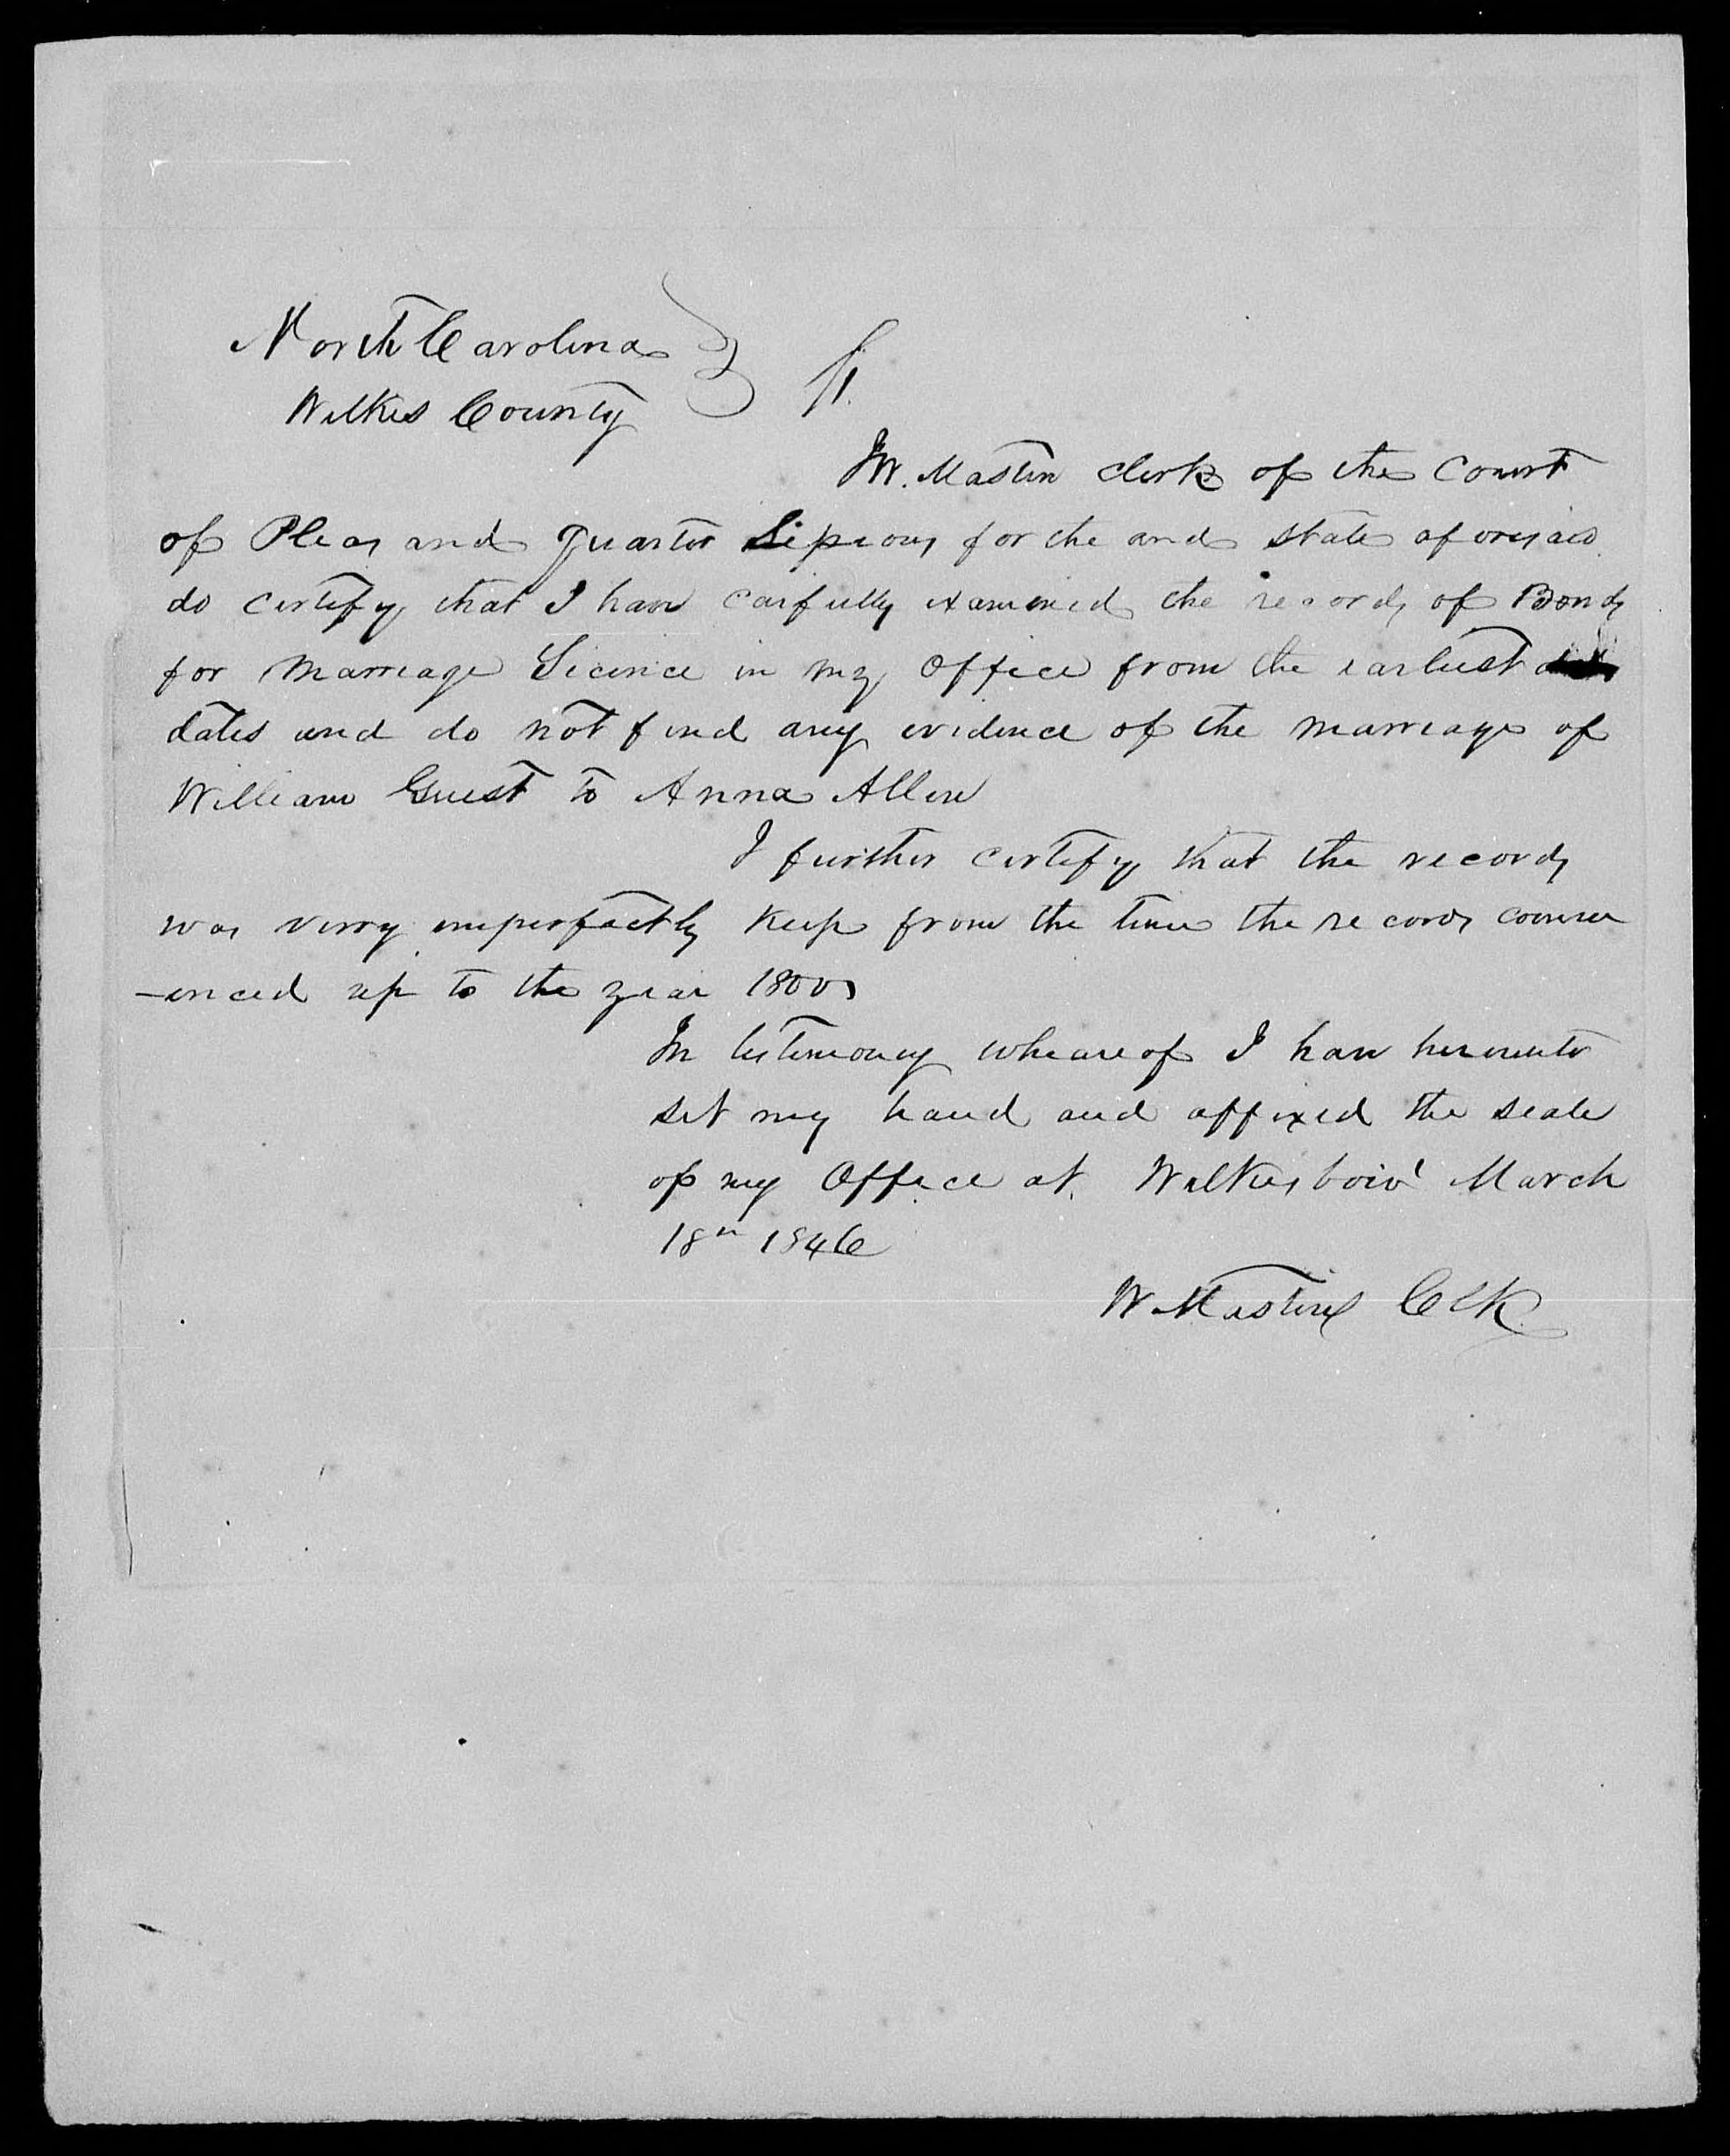 Proof of Marriage for William Guest and Anna Allen, 18 March 1846